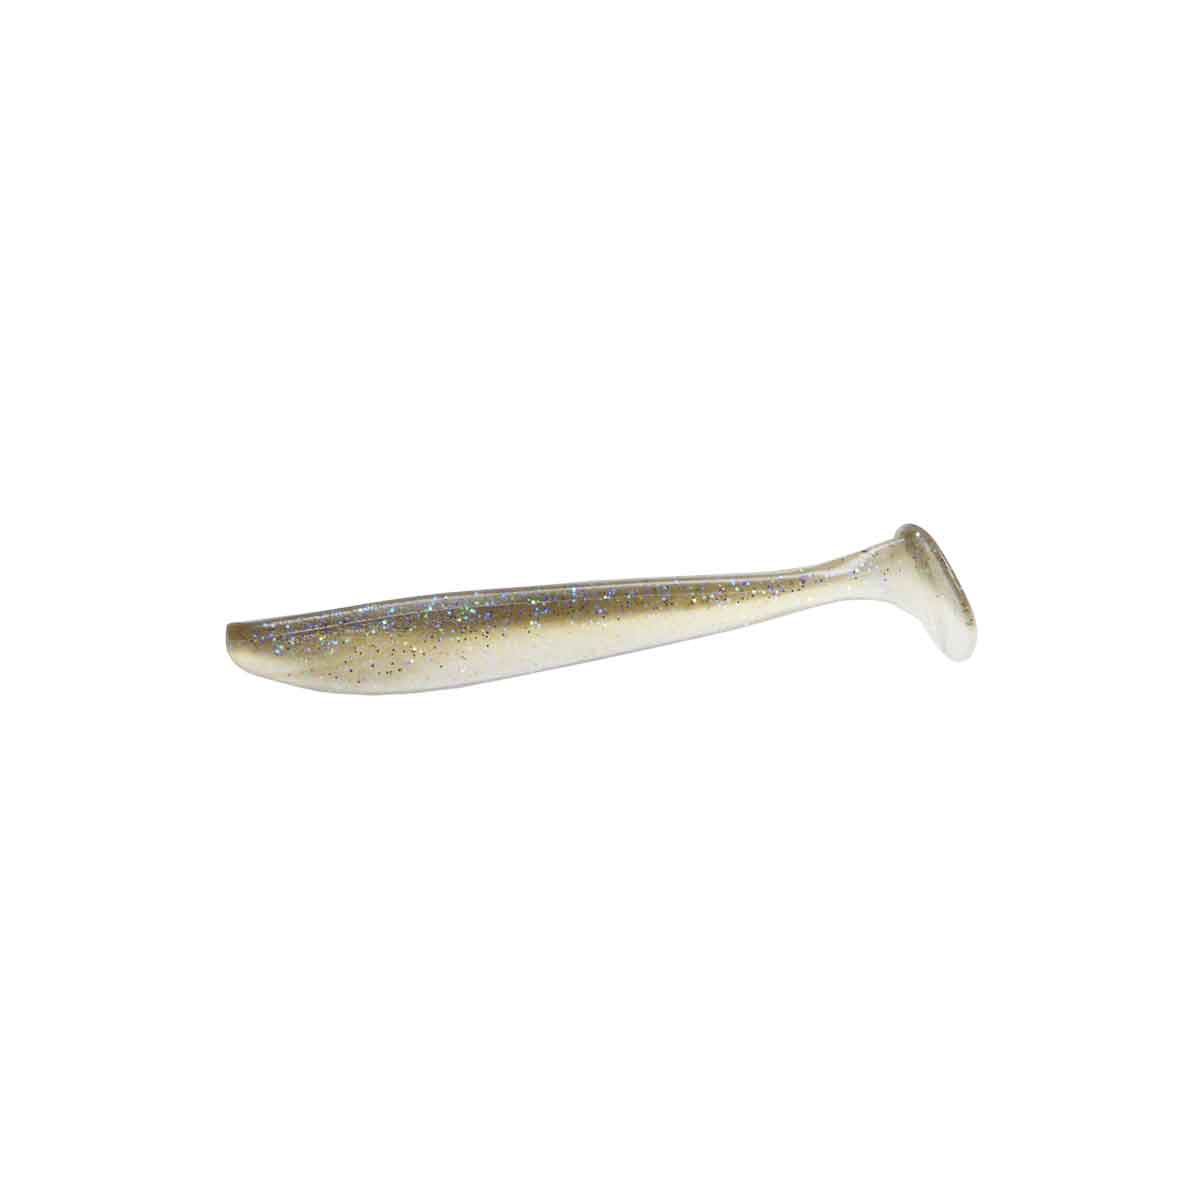 Boot Tail Fluke_Electric Shad